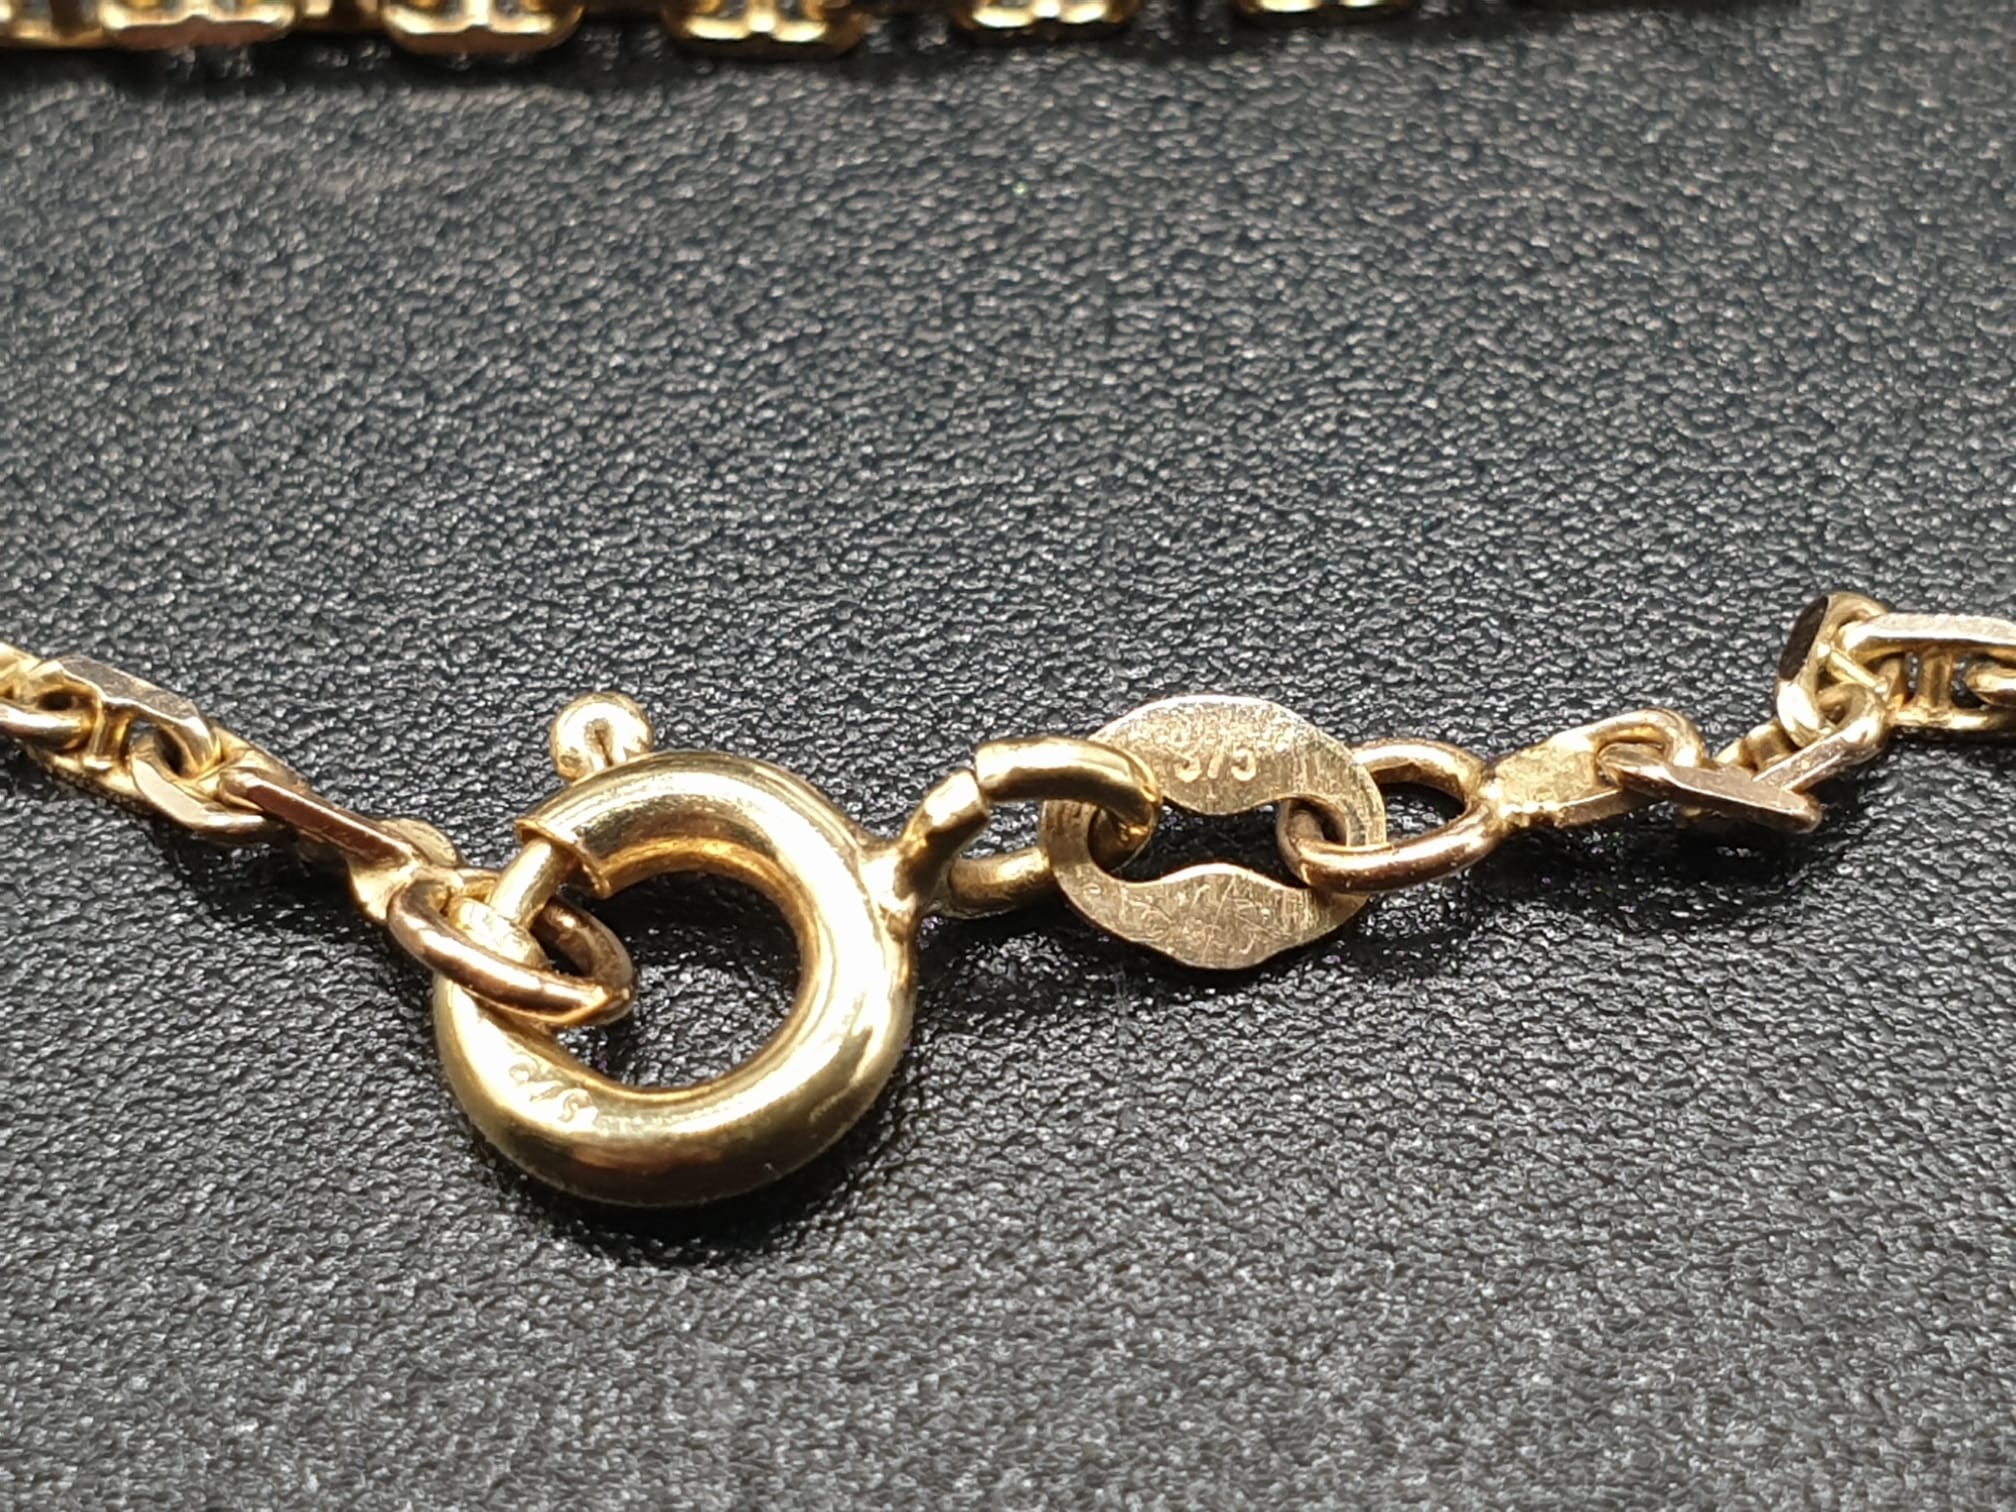 A SAPPHIRE AND OPEL PENDANT ON A 40 cms 9K GOLD CHAIN. - Image 5 of 7